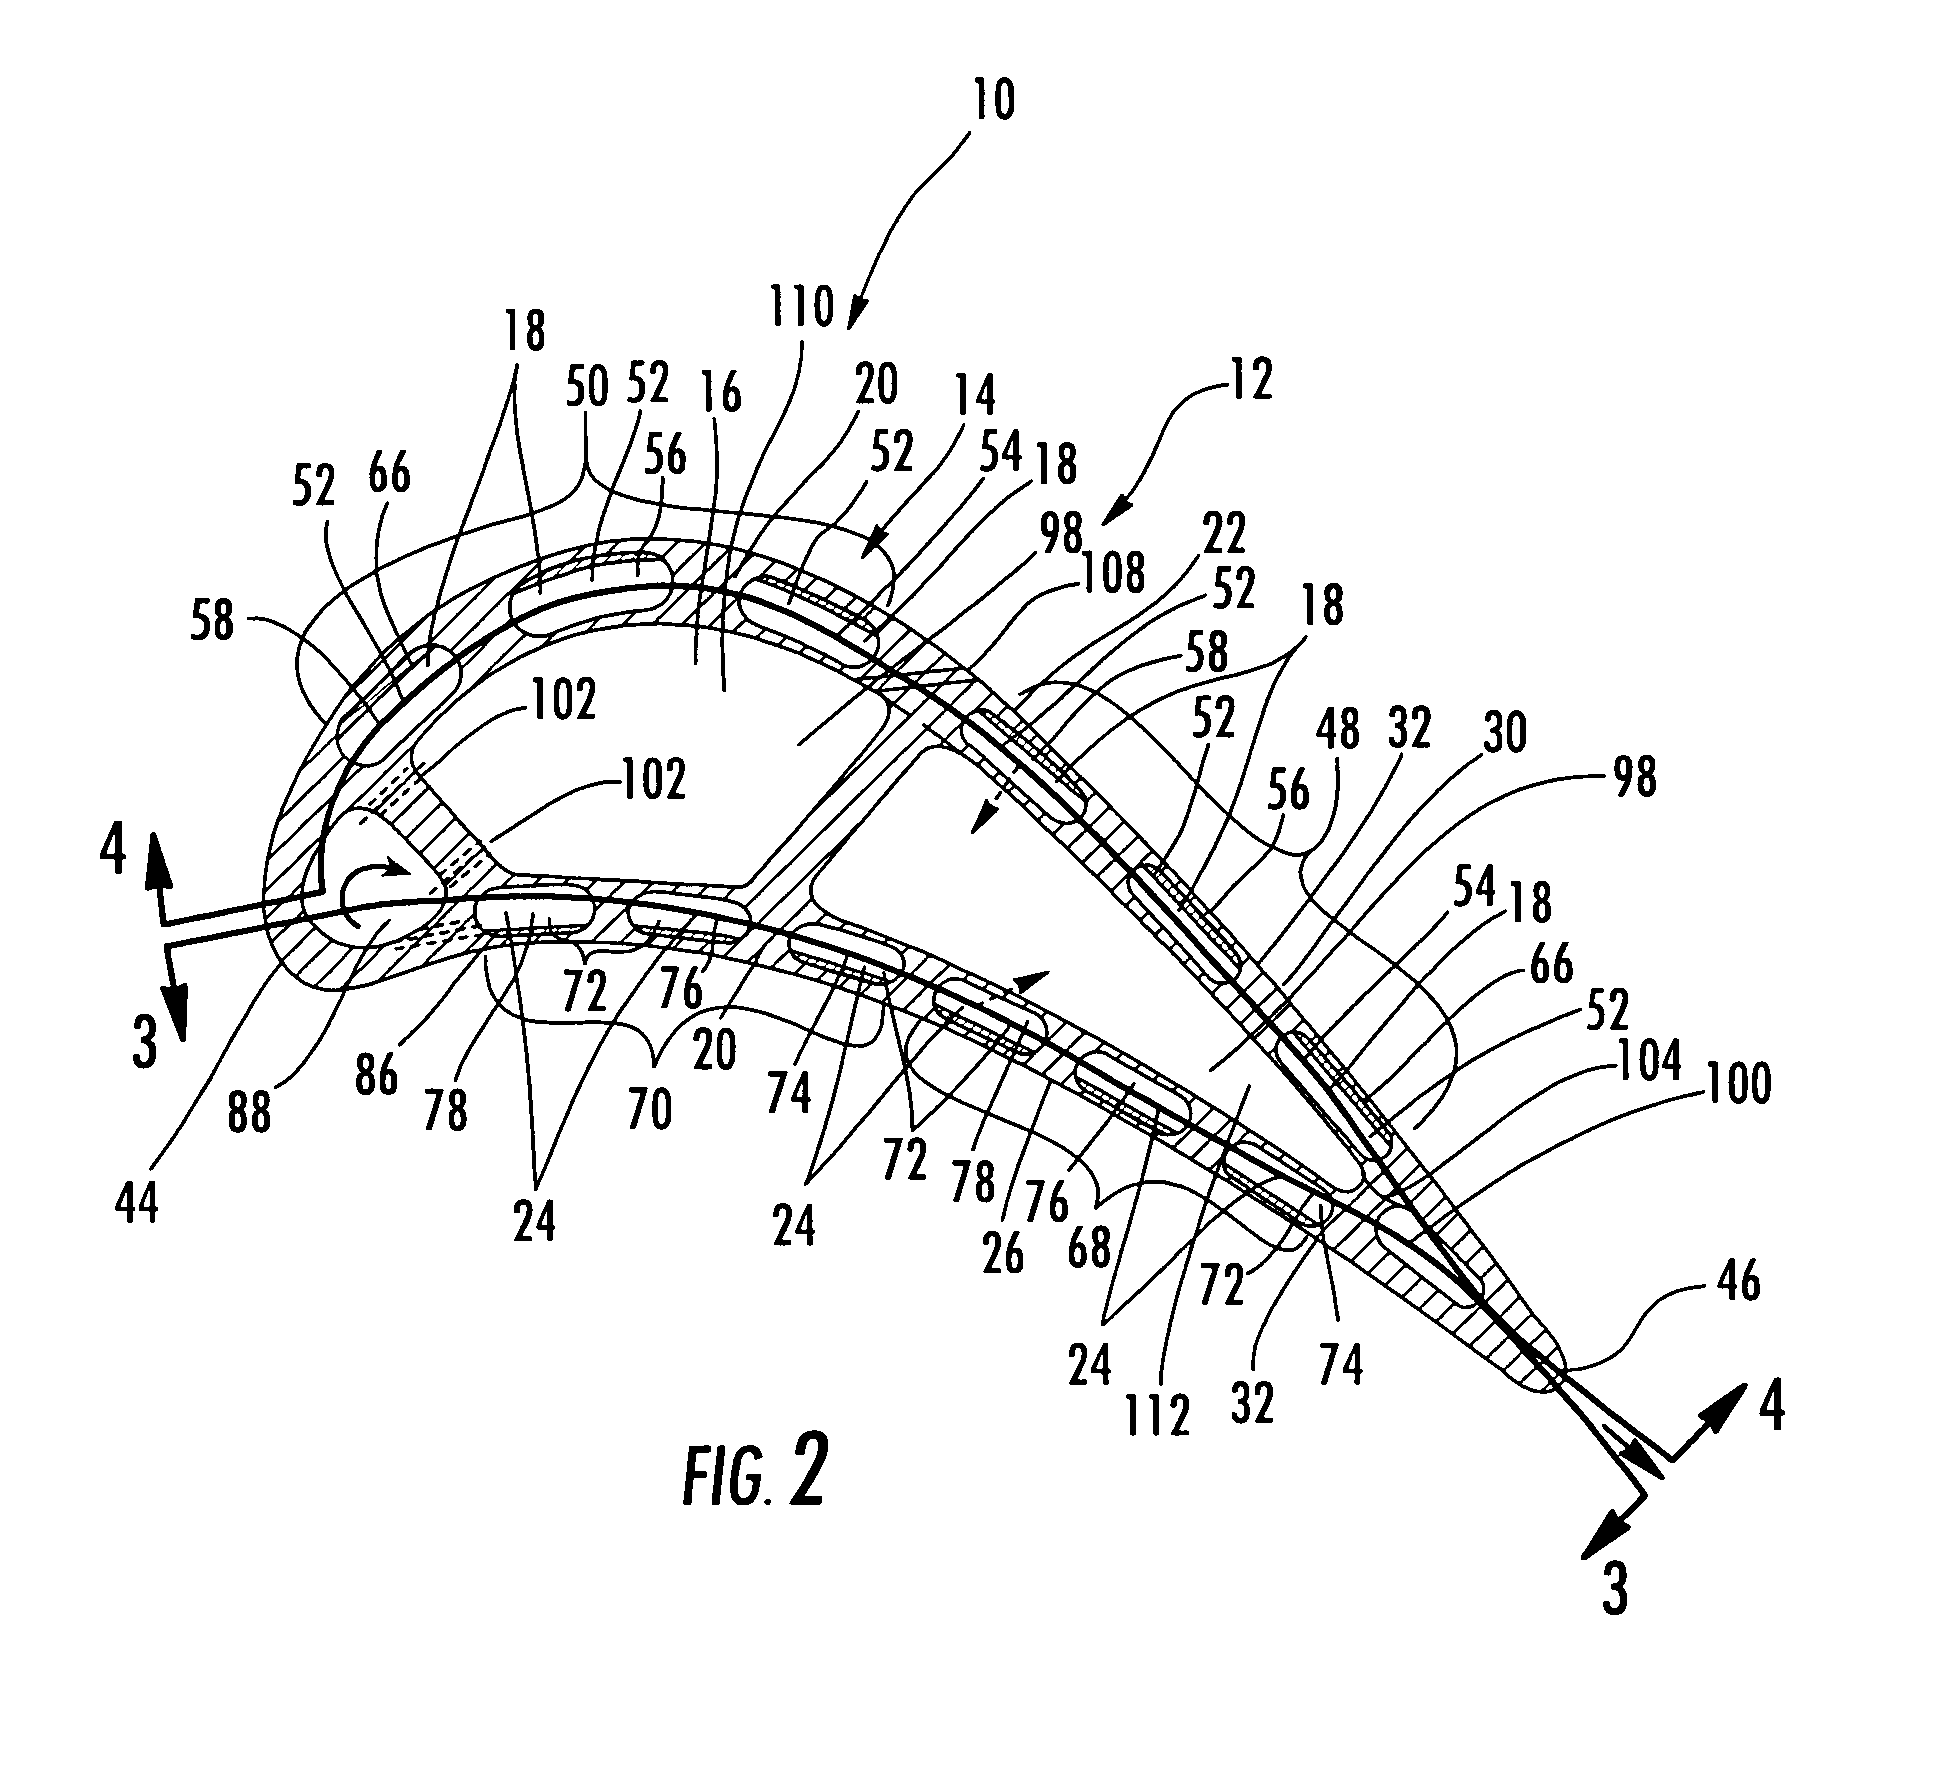 Turbine airfoil with near wall multi-serpentine cooling channels